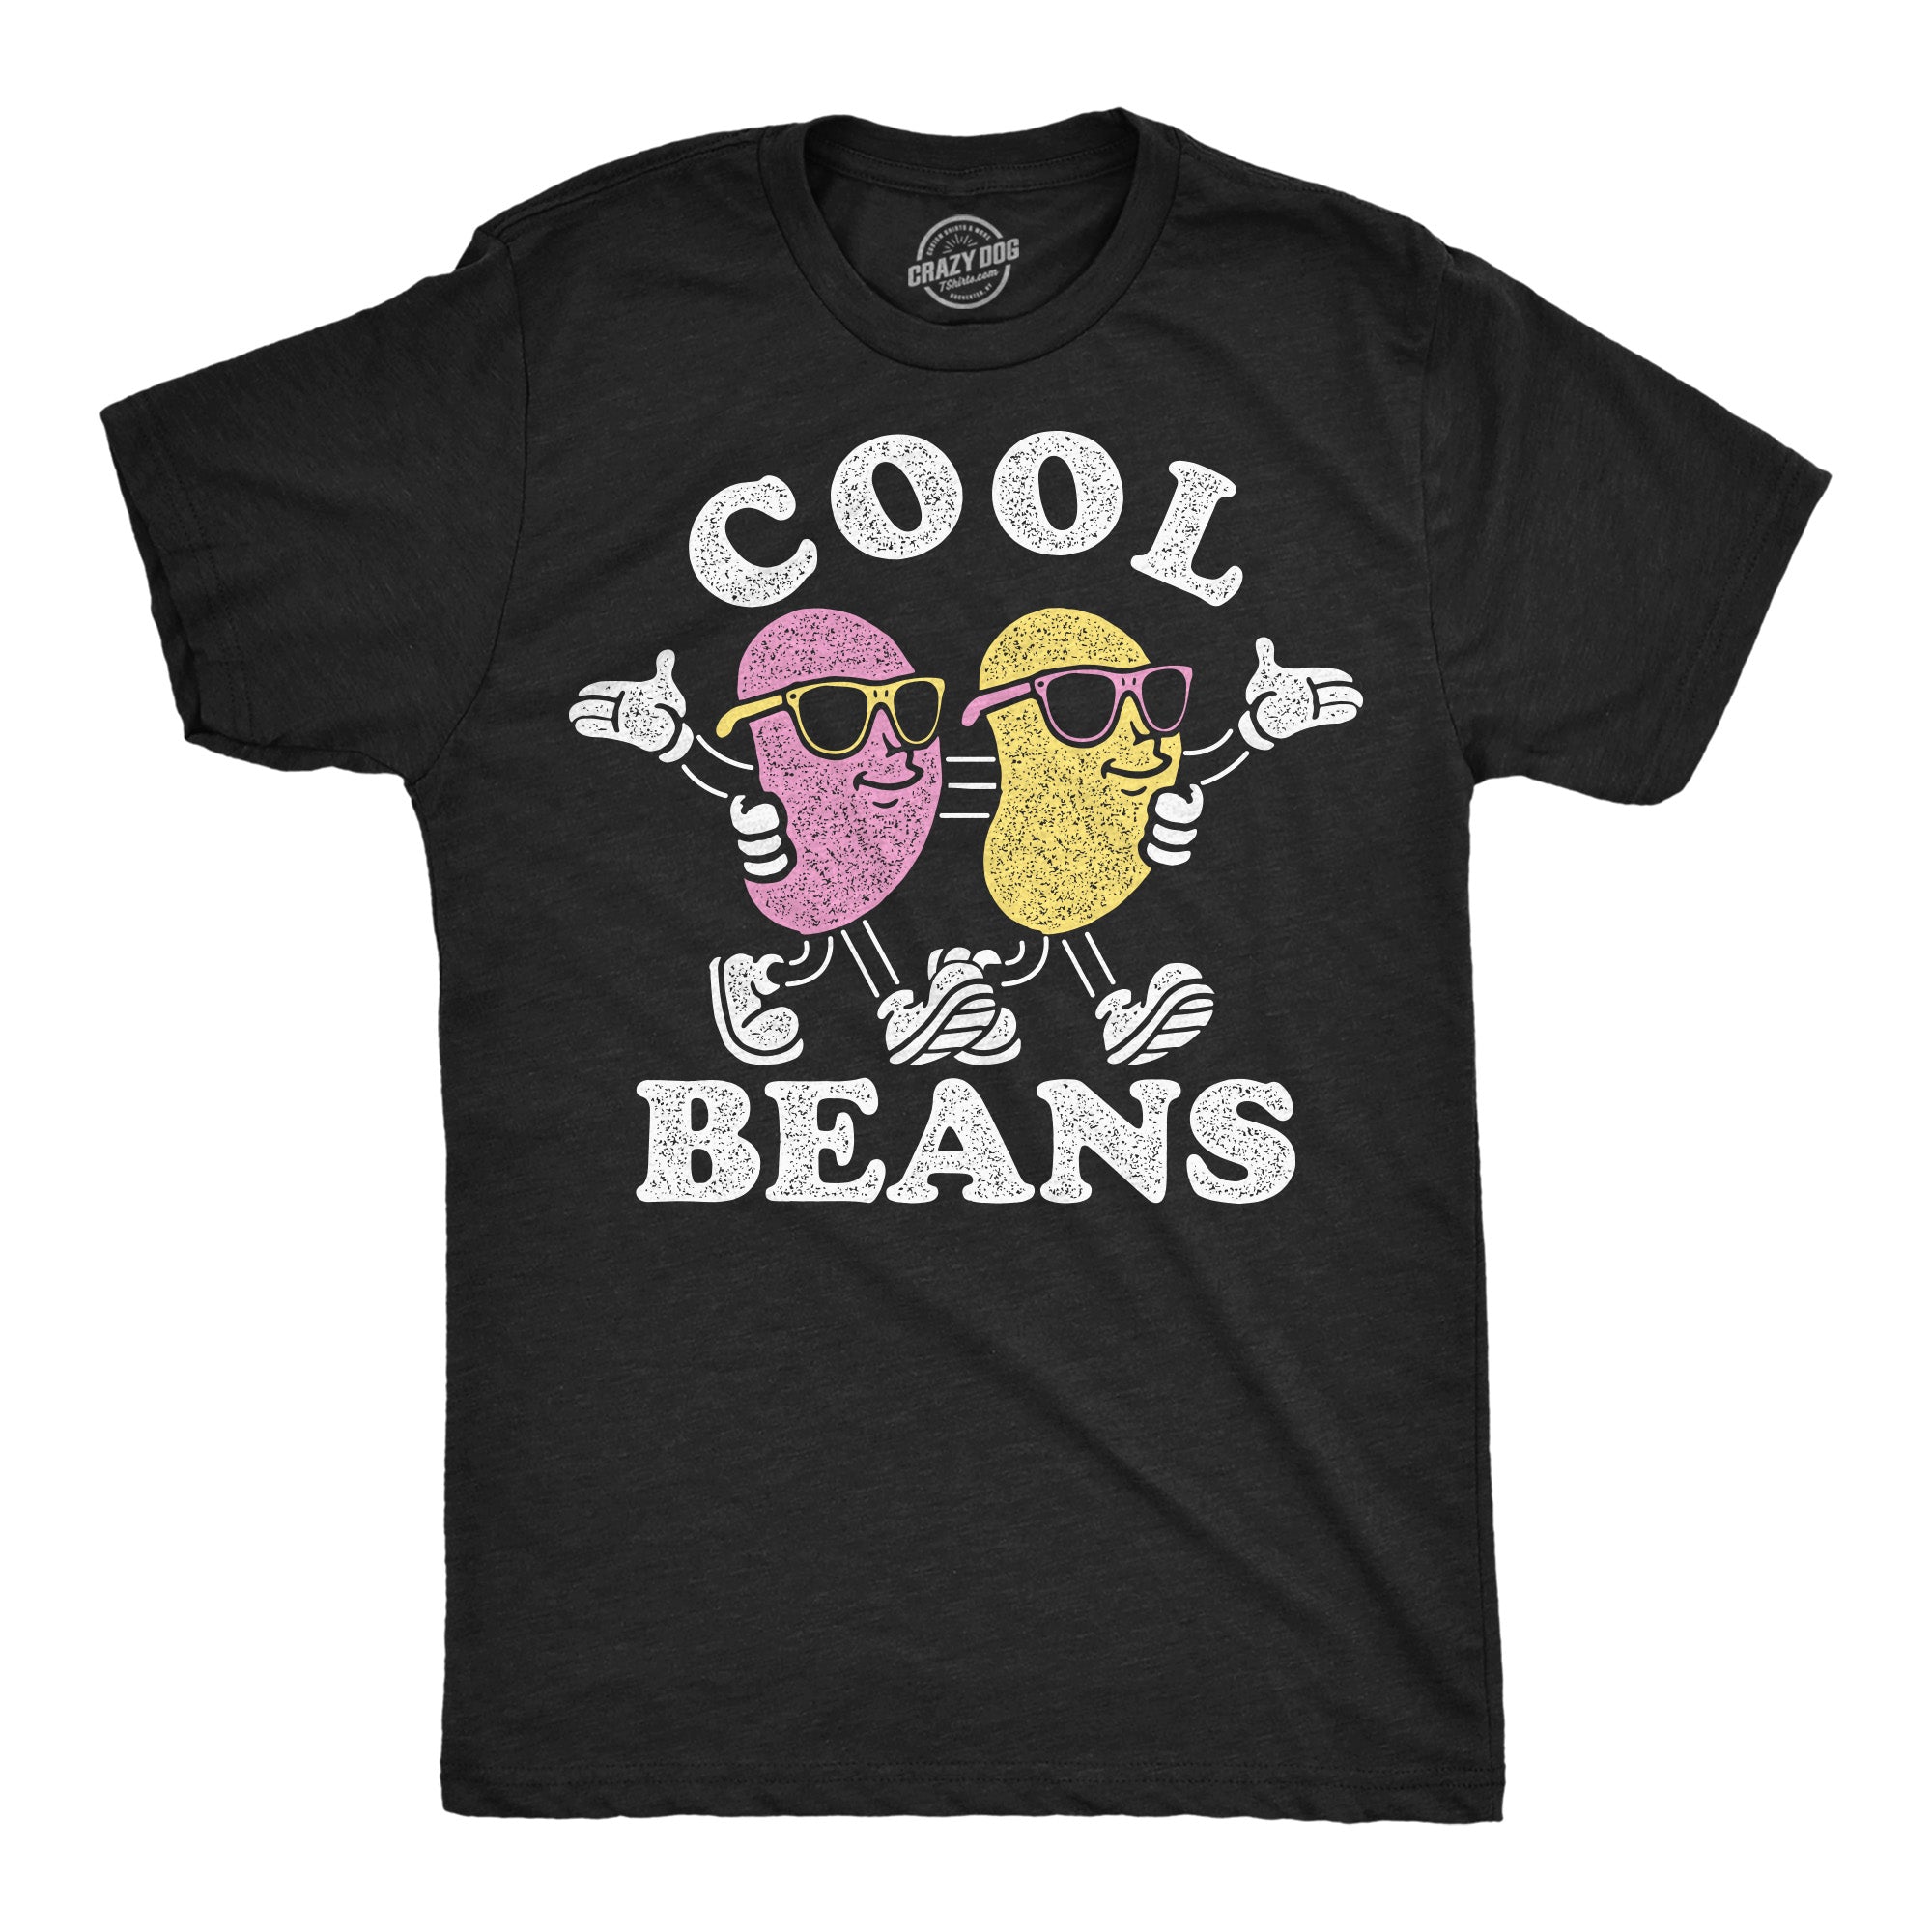 Funny Heather Black - Cool Beans Cool Beans Mens T Shirt Nerdy Easter sarcastic Tee